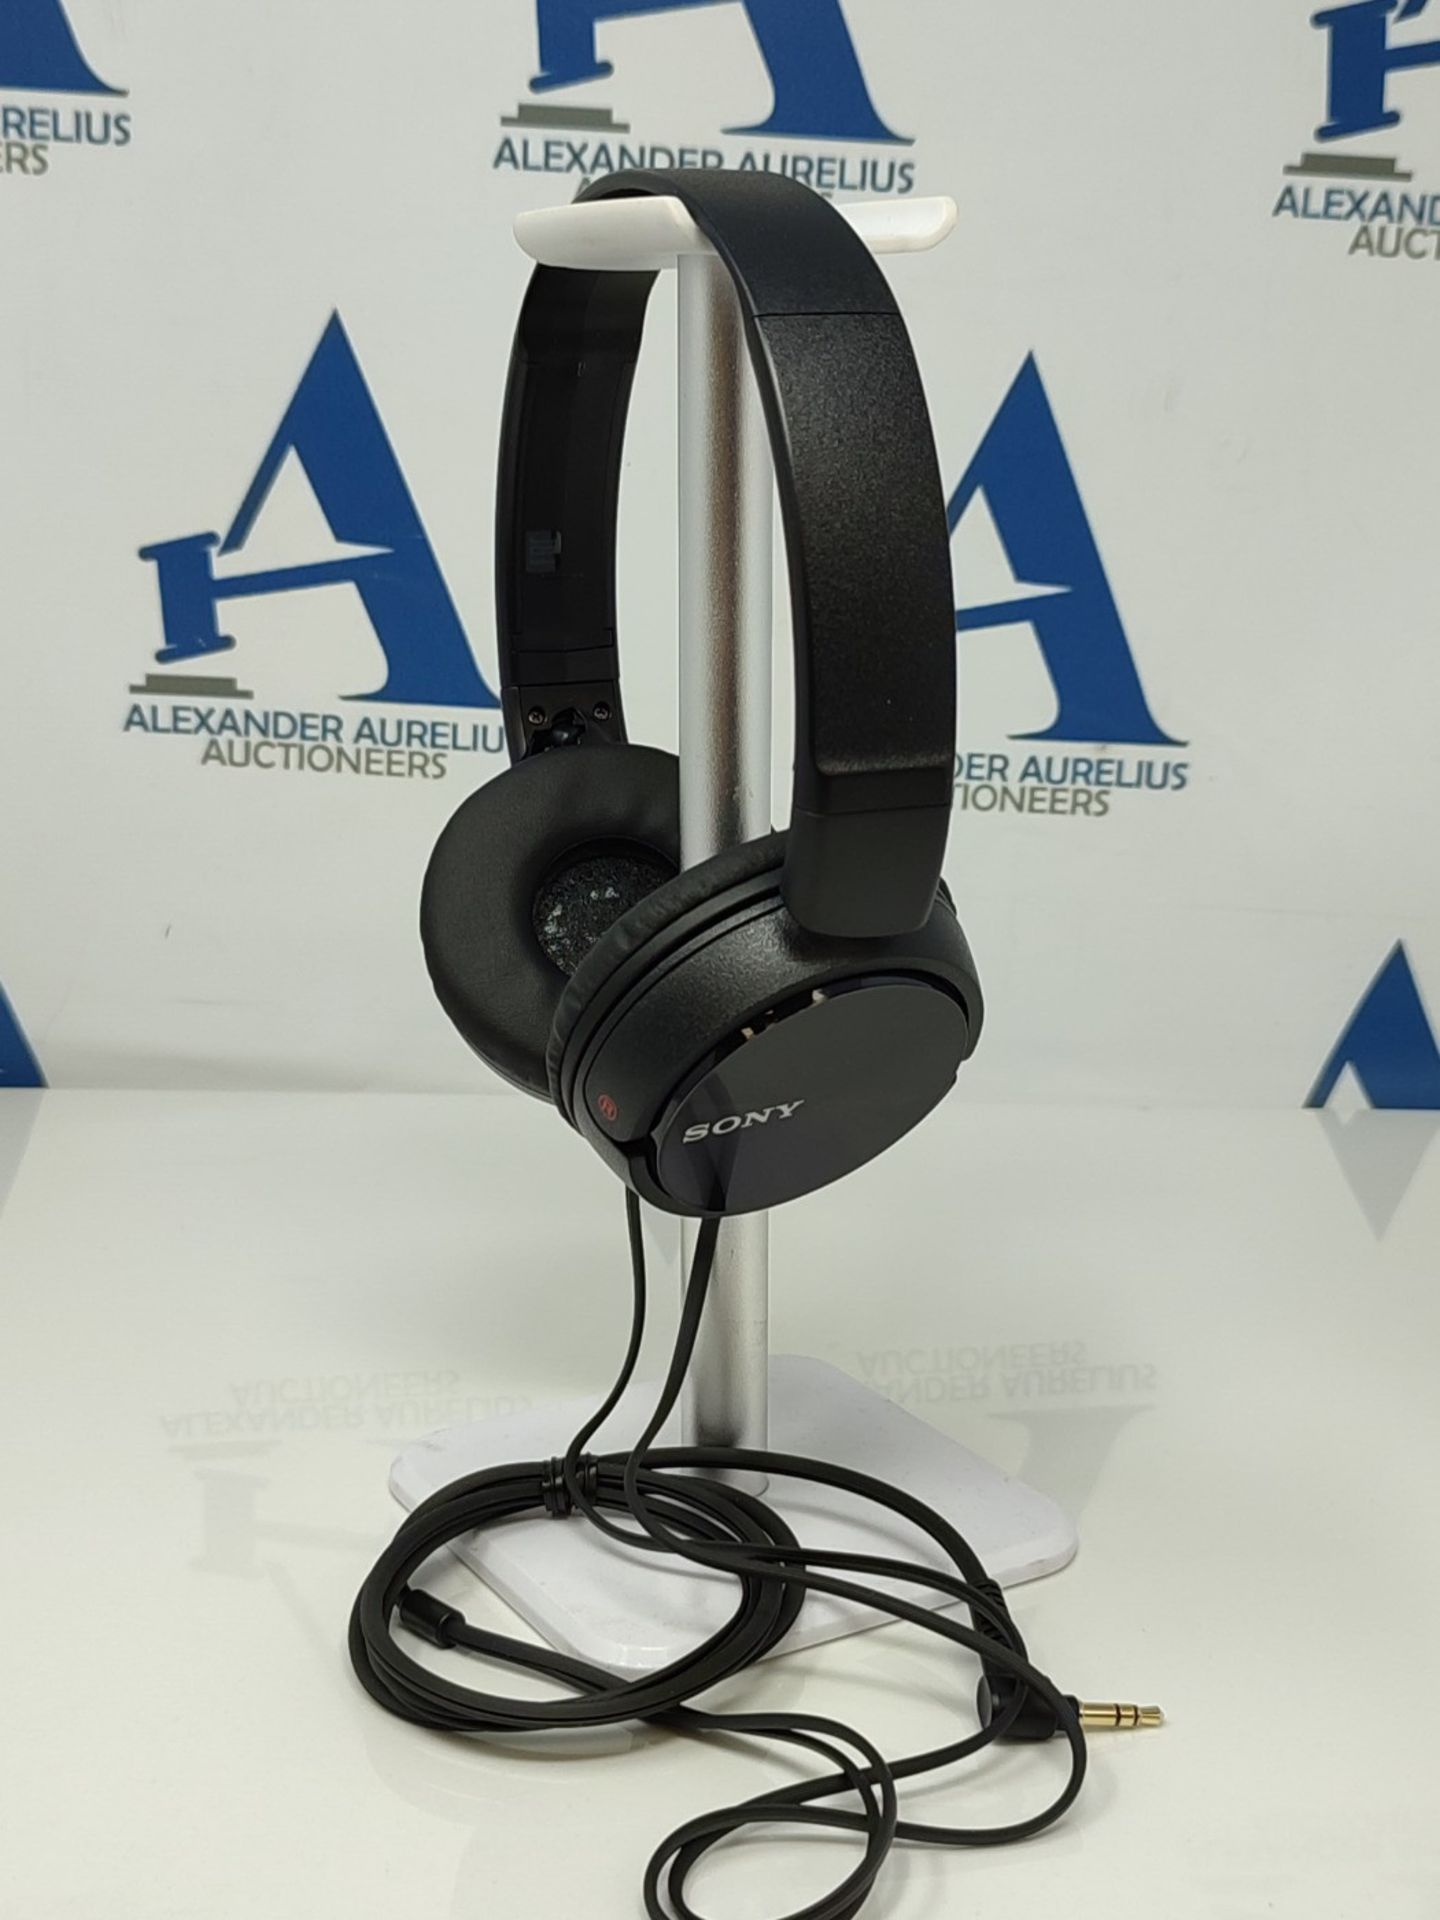 Sony MDR-ZX310W Lifestyle Headphones, Black - Image 2 of 2